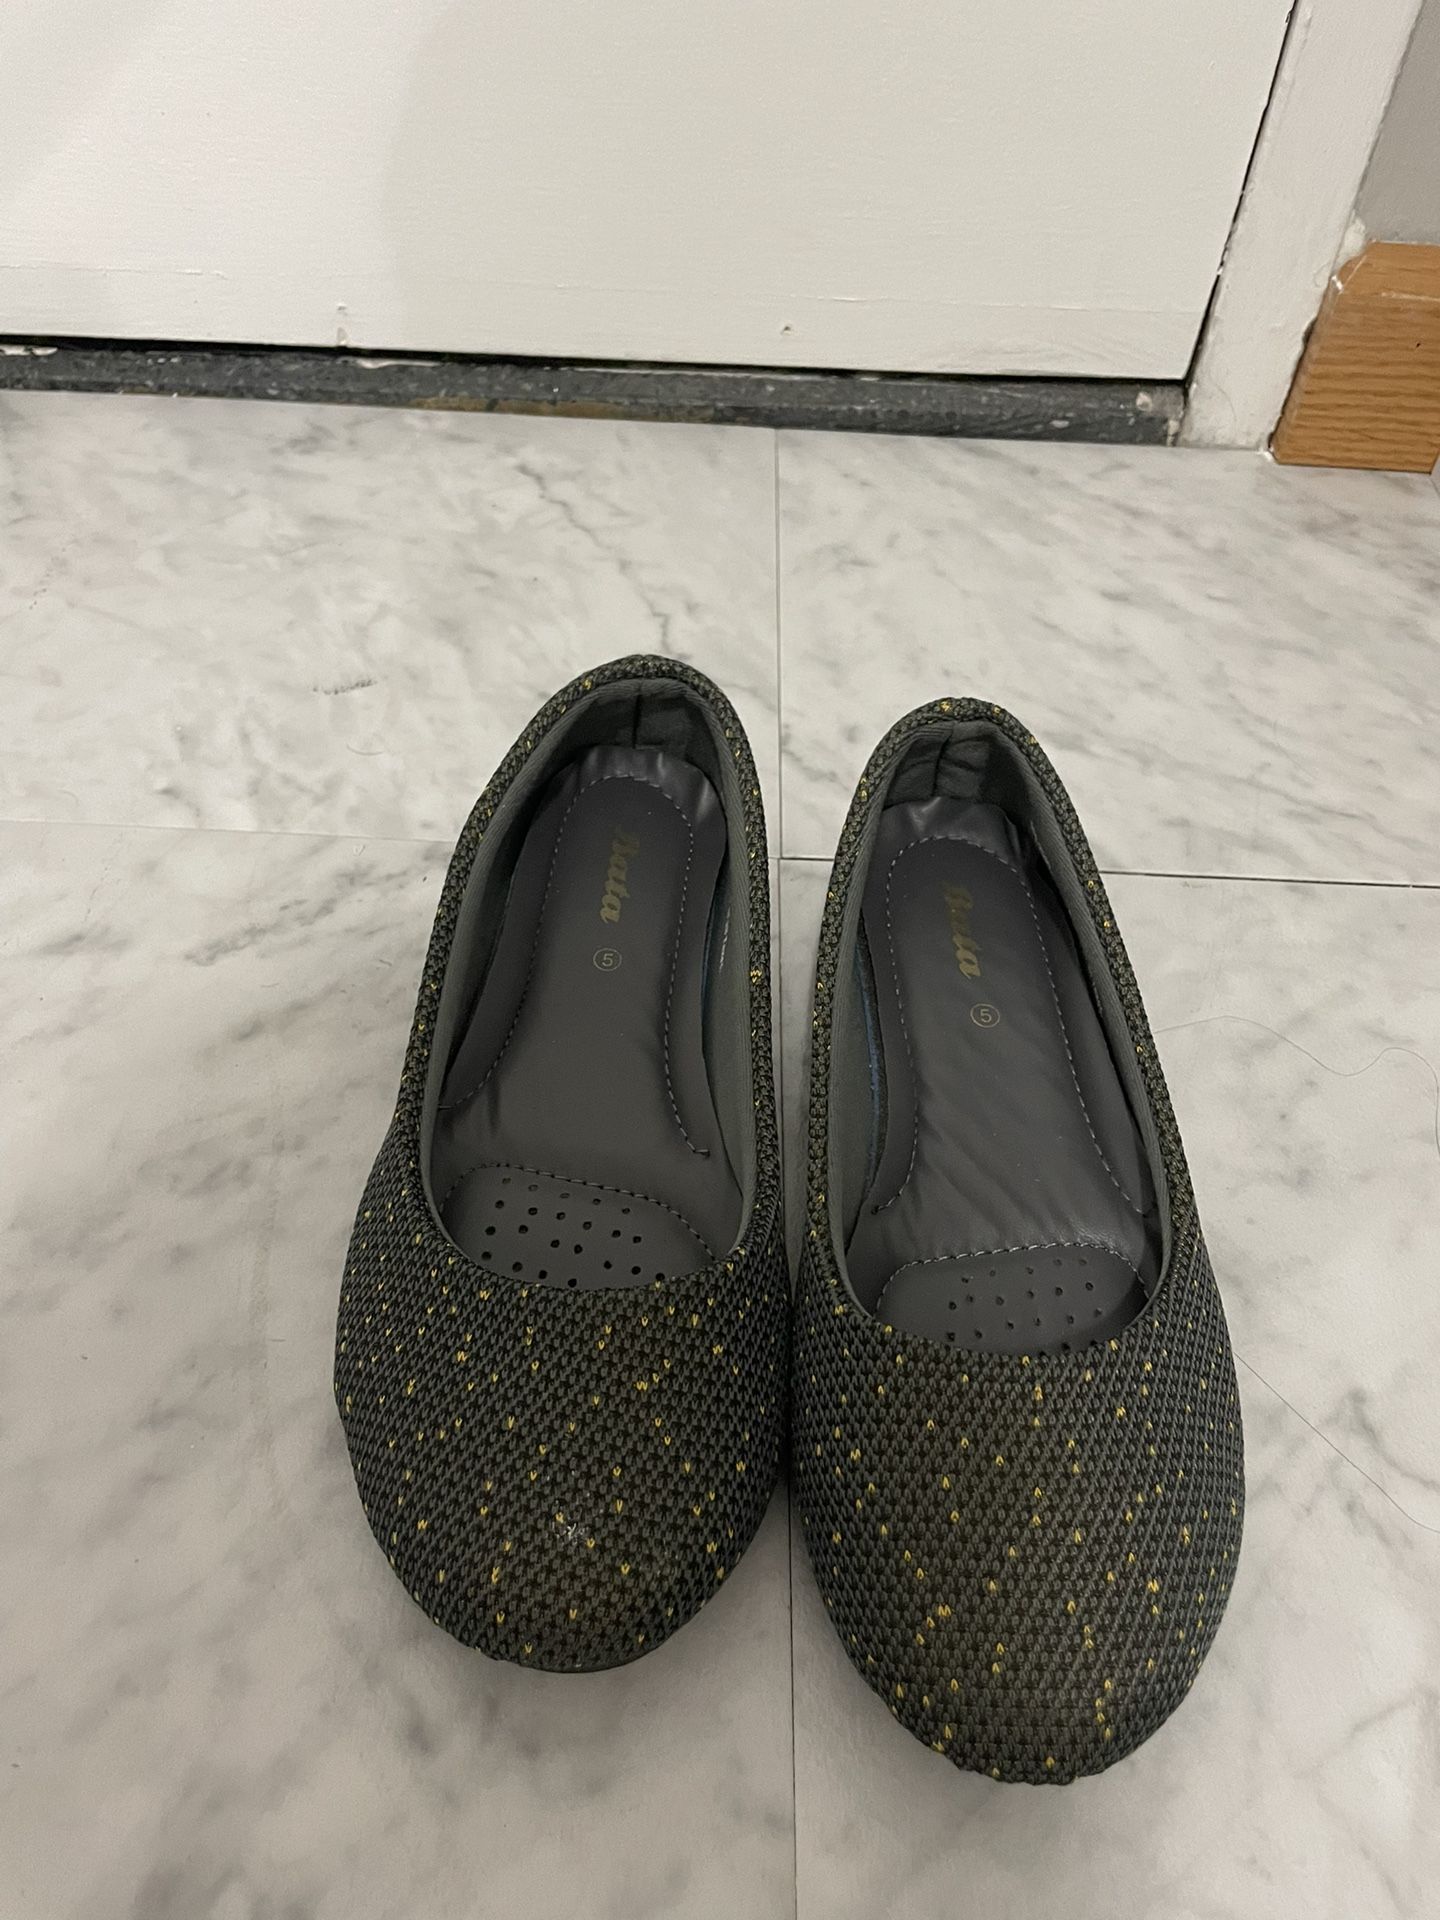 Slippers And Shoes In Good Condition